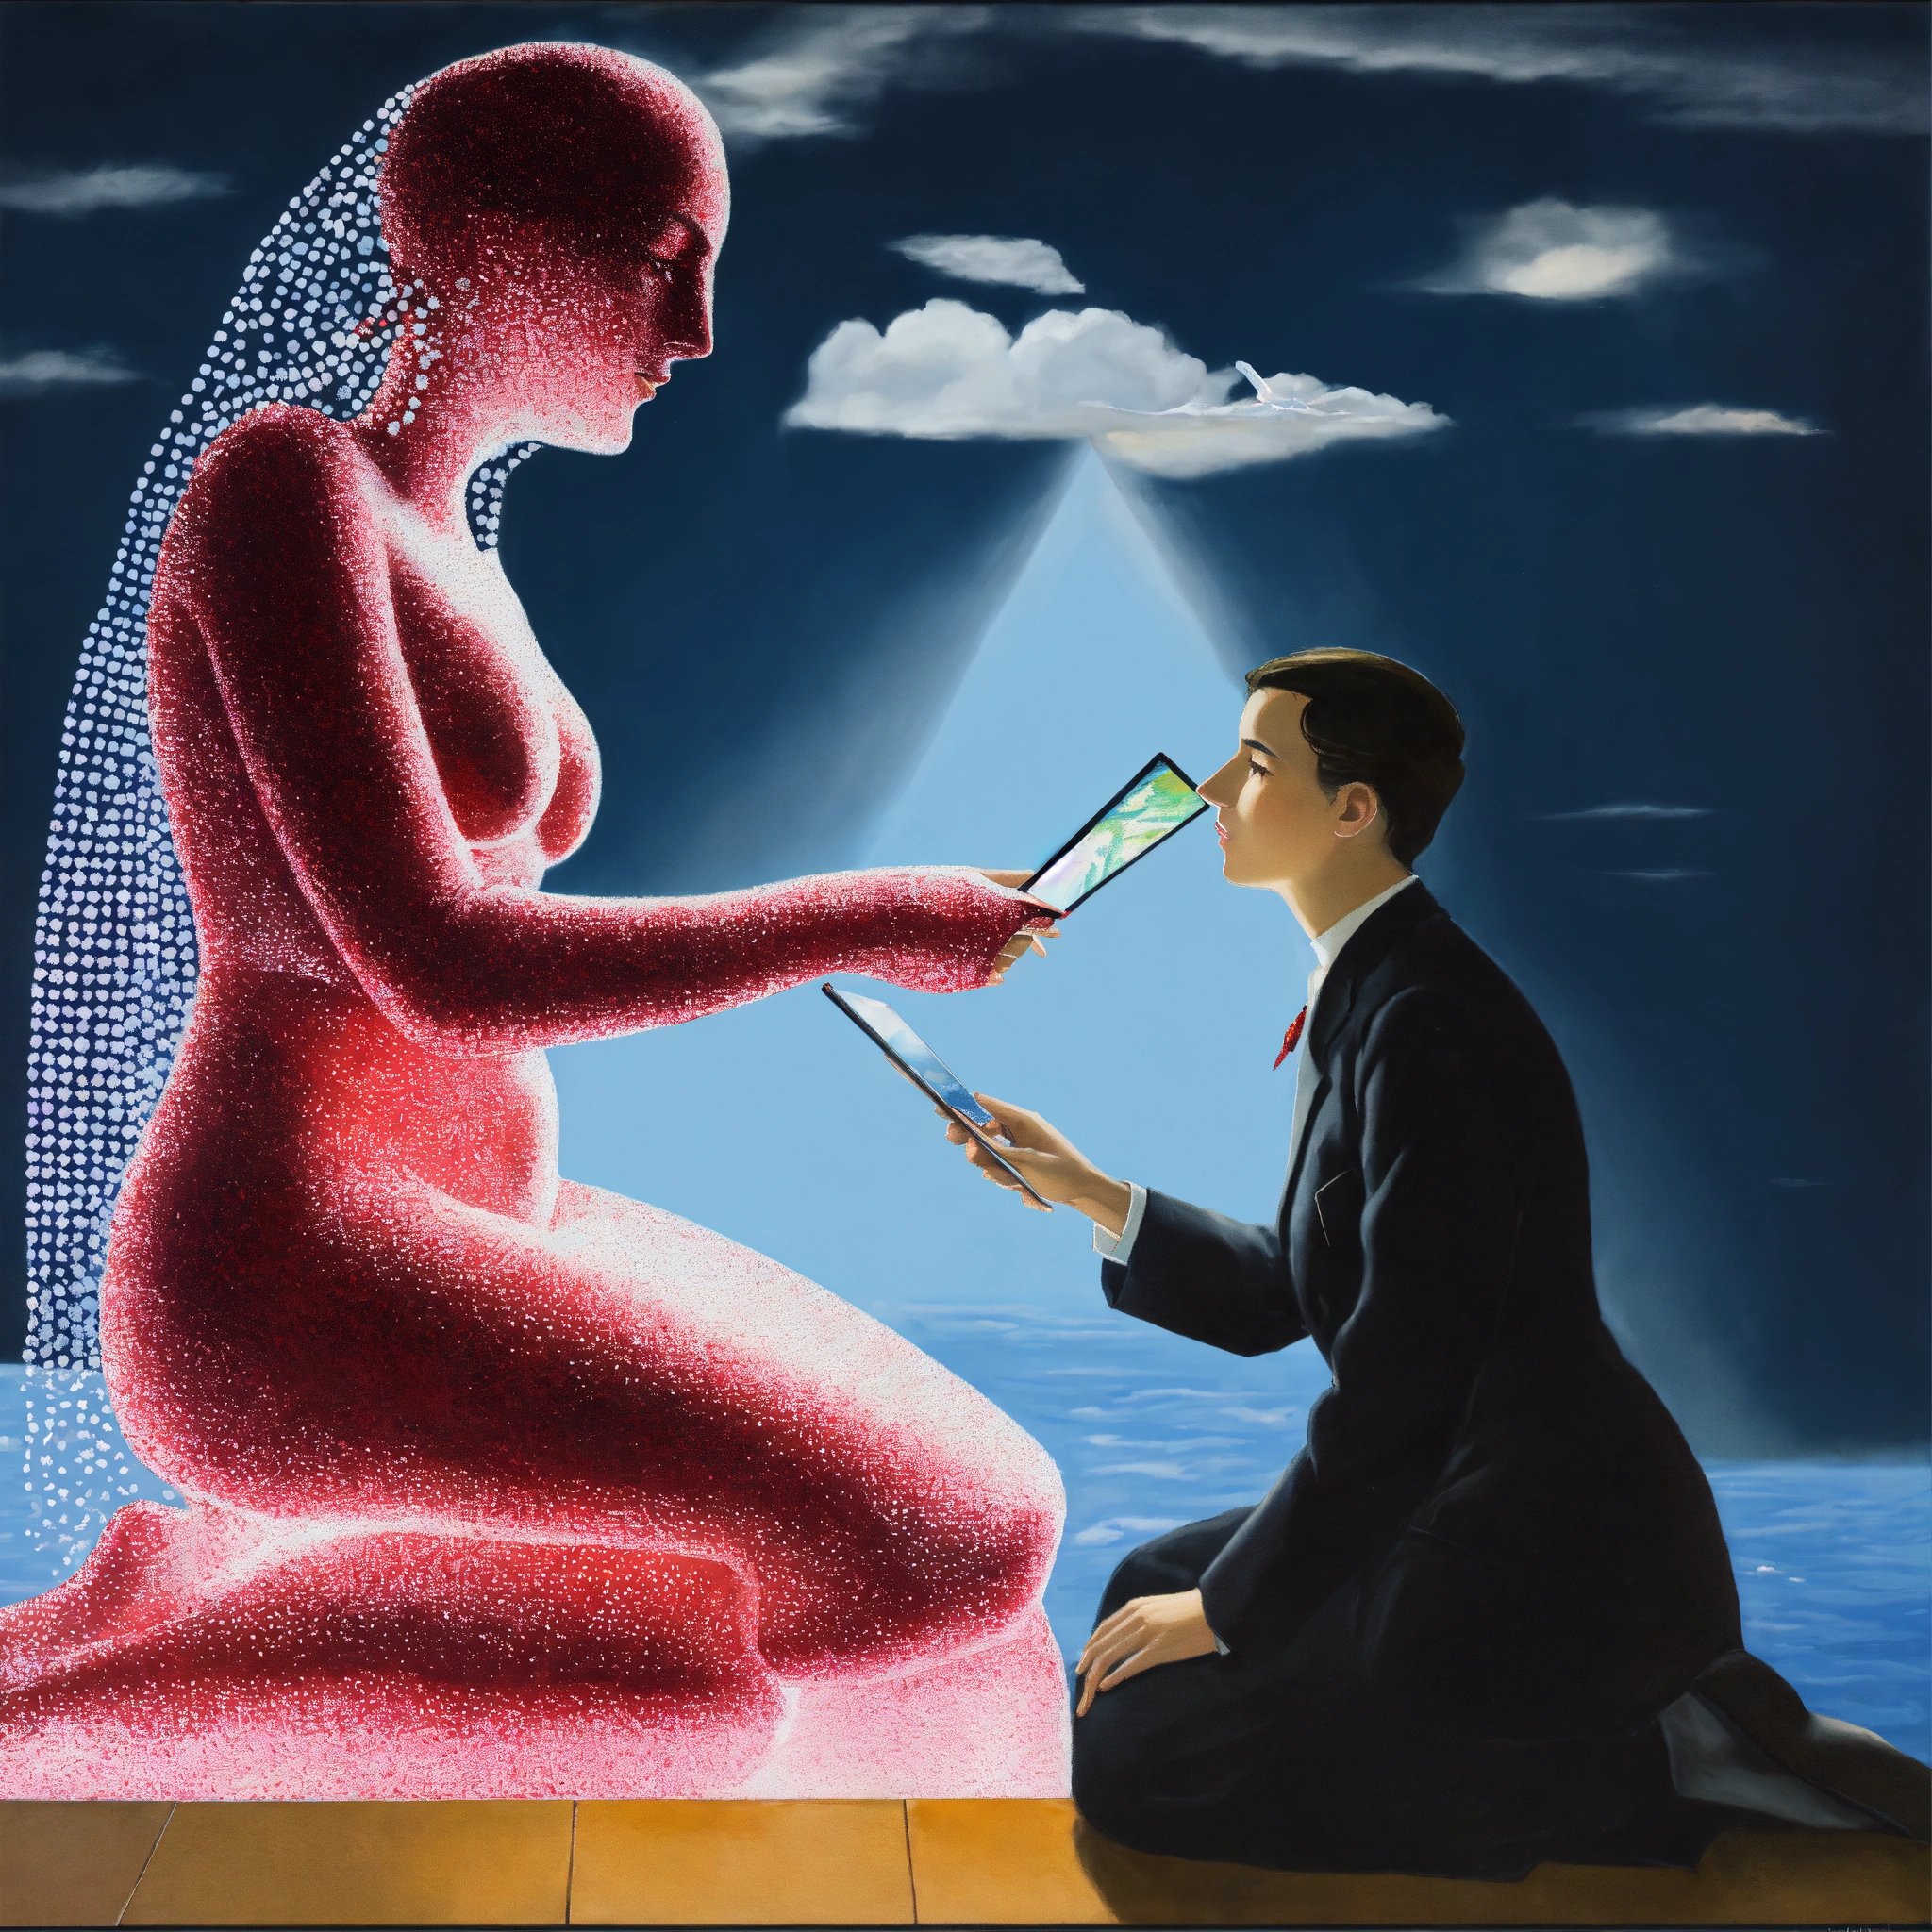 a surreal scene where two figures are interacting against a backdrop of a night sky with clouds and beams of light shining through. One figure is covered in red sparkles, kneeling, and appears to be offering something to the second figure, who is dressed in formal attire and holding an open book or folder. The first figure is covered in red sparkles from head to toe, giving it an ethereal appearance. The second figure is wearing a dark suit and is positioned on one knee. Both figures are set against a dramatic night sky backdrop with clouds and beams of light shining down. The interaction between the two figures seems significant or ceremonial; the sparkling figure appears to be offering something to the other. There’s an element of fantasy or surrealism due to the sparkling effect on one of the figures and the dramatic lighting from above.